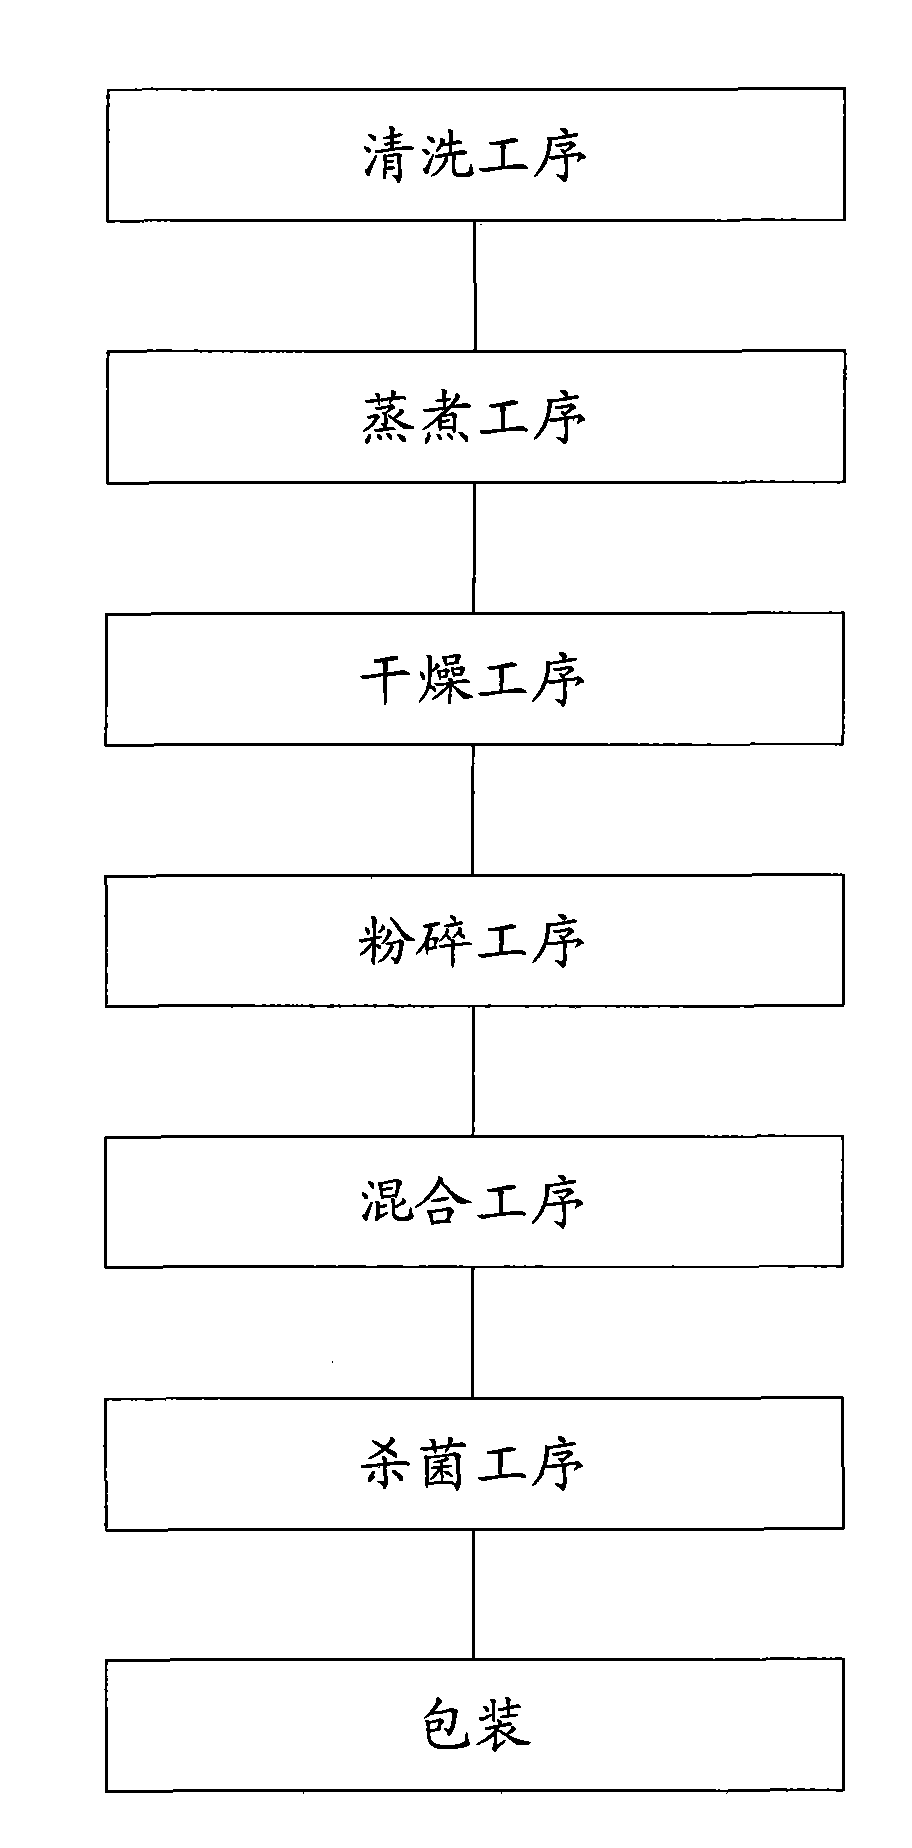 Method for manufacturing loach powder